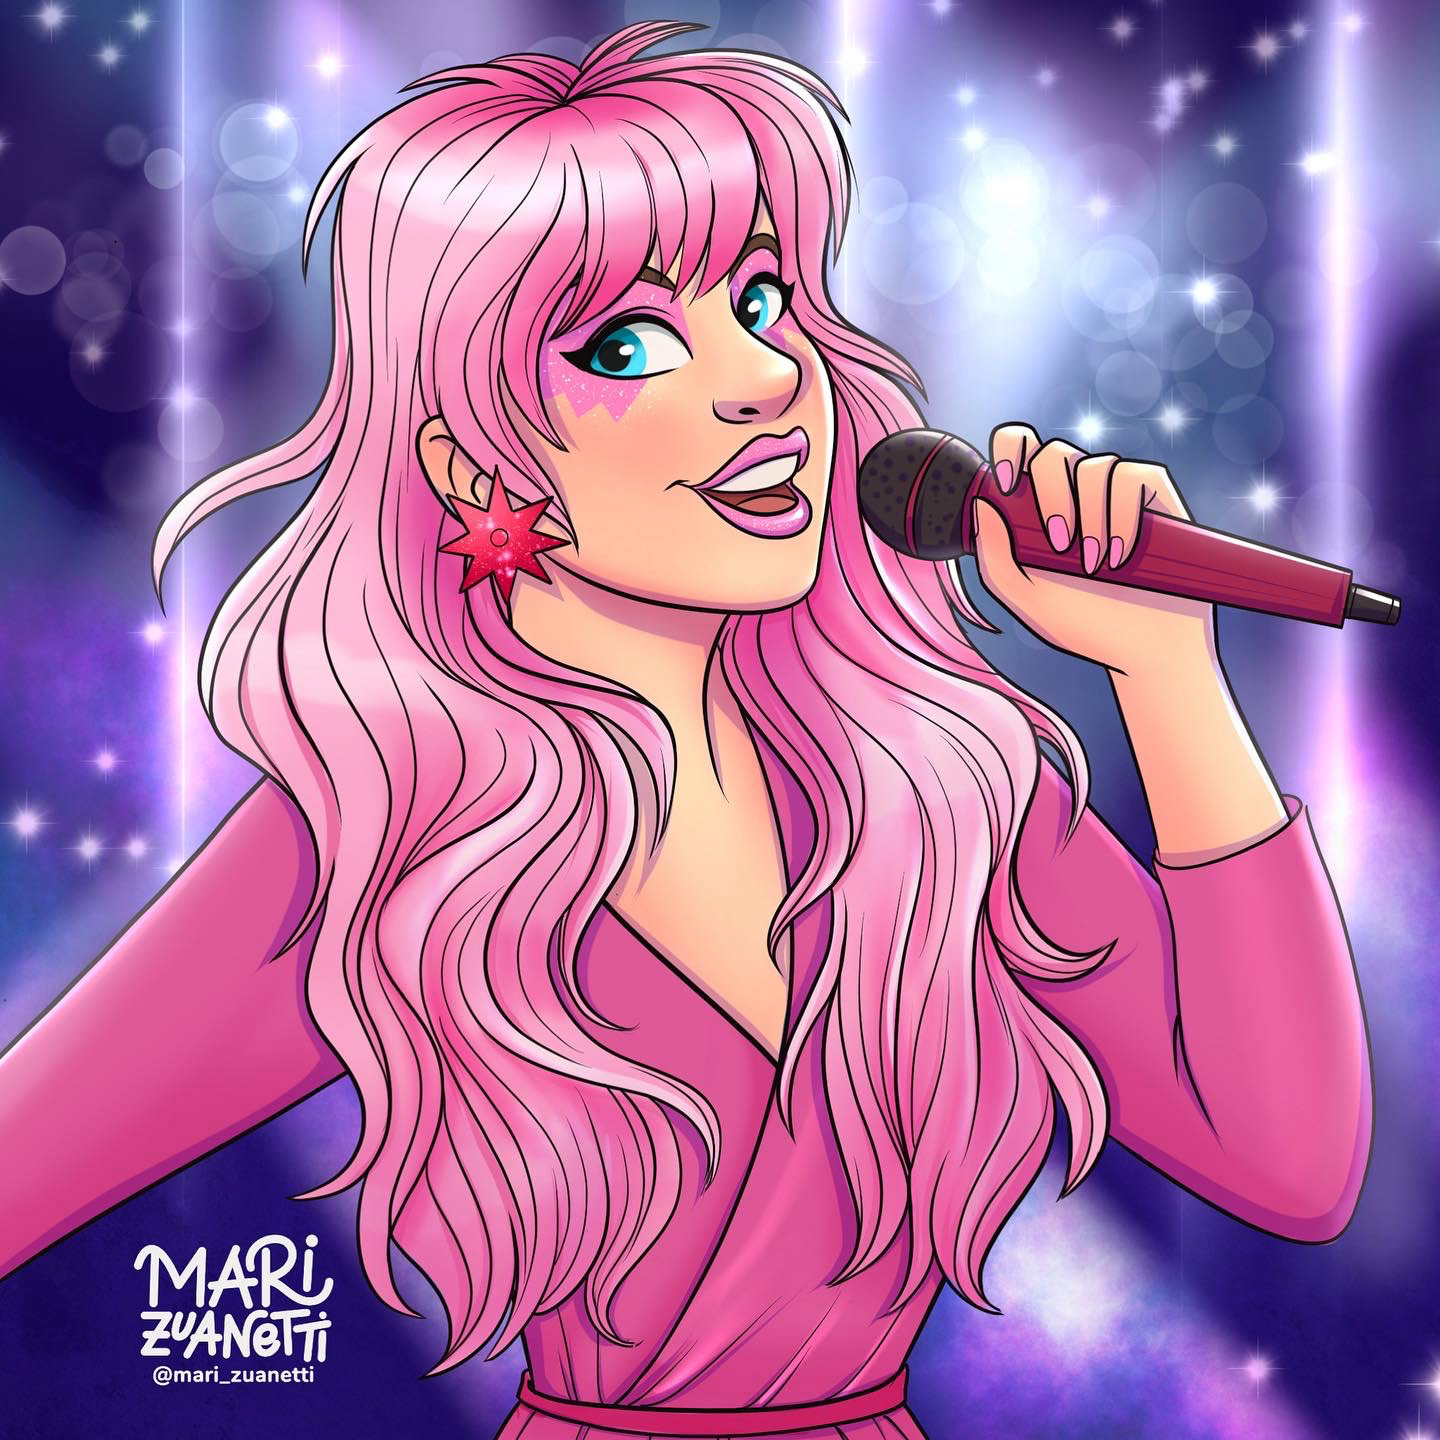 Jem and the holograms | Behance